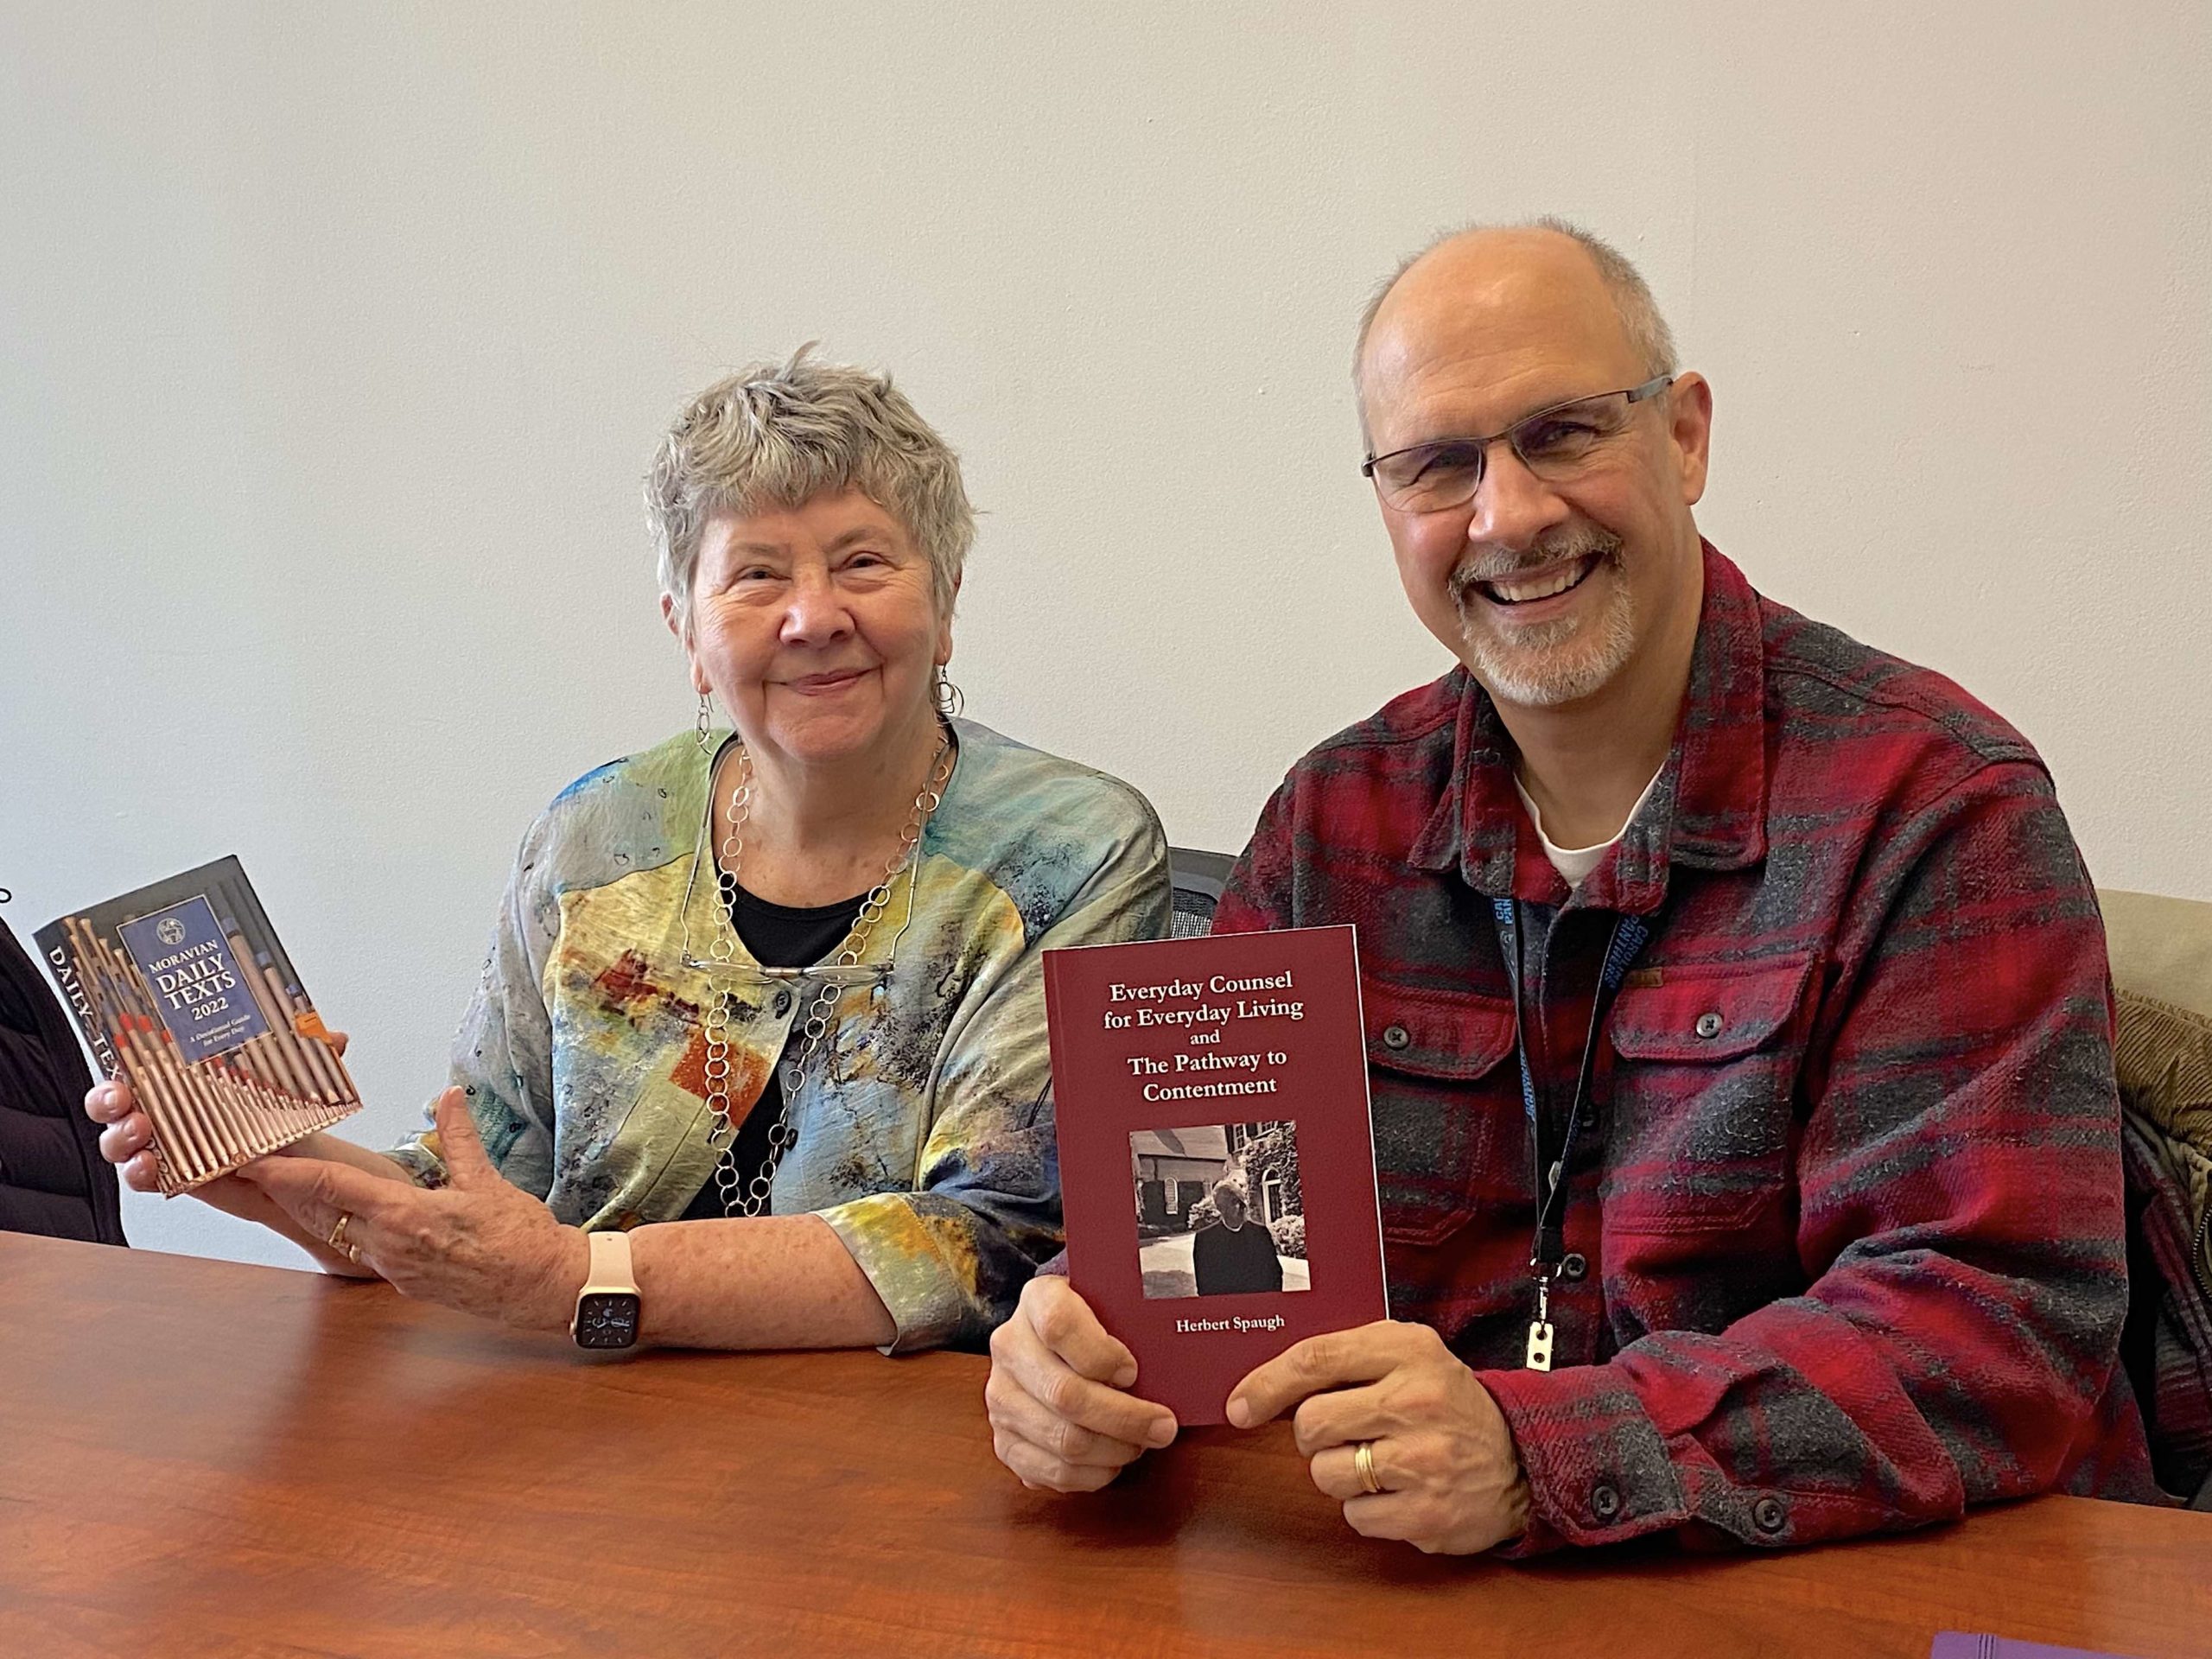 Margie Lamb, chair of Friends of Moravian Prison Ministry, and The Rev. Jeff Carter, chaplain for Forsyth Jail and Prison Ministry, holding the devotionals purchased with their grant from the Prison Ministry Field of Interest Fund, managed by the Moravian Ministries Foundation in America.